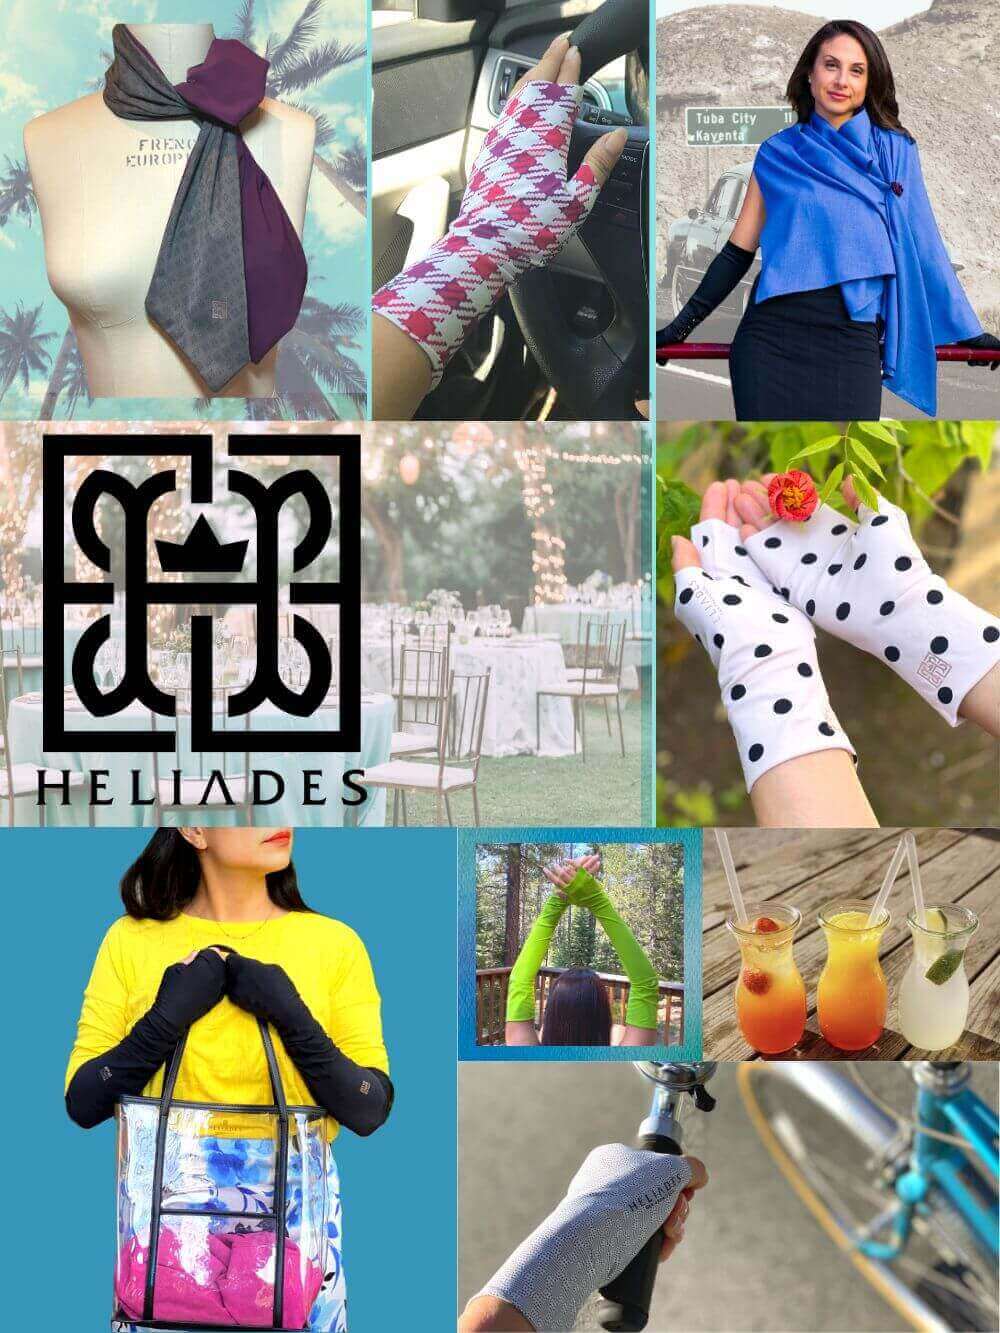 Clean Fashion Sun Protection Clothing, Capes, UV Gloves - Heliades –  Heliades Fashion Sun Protection Clothing